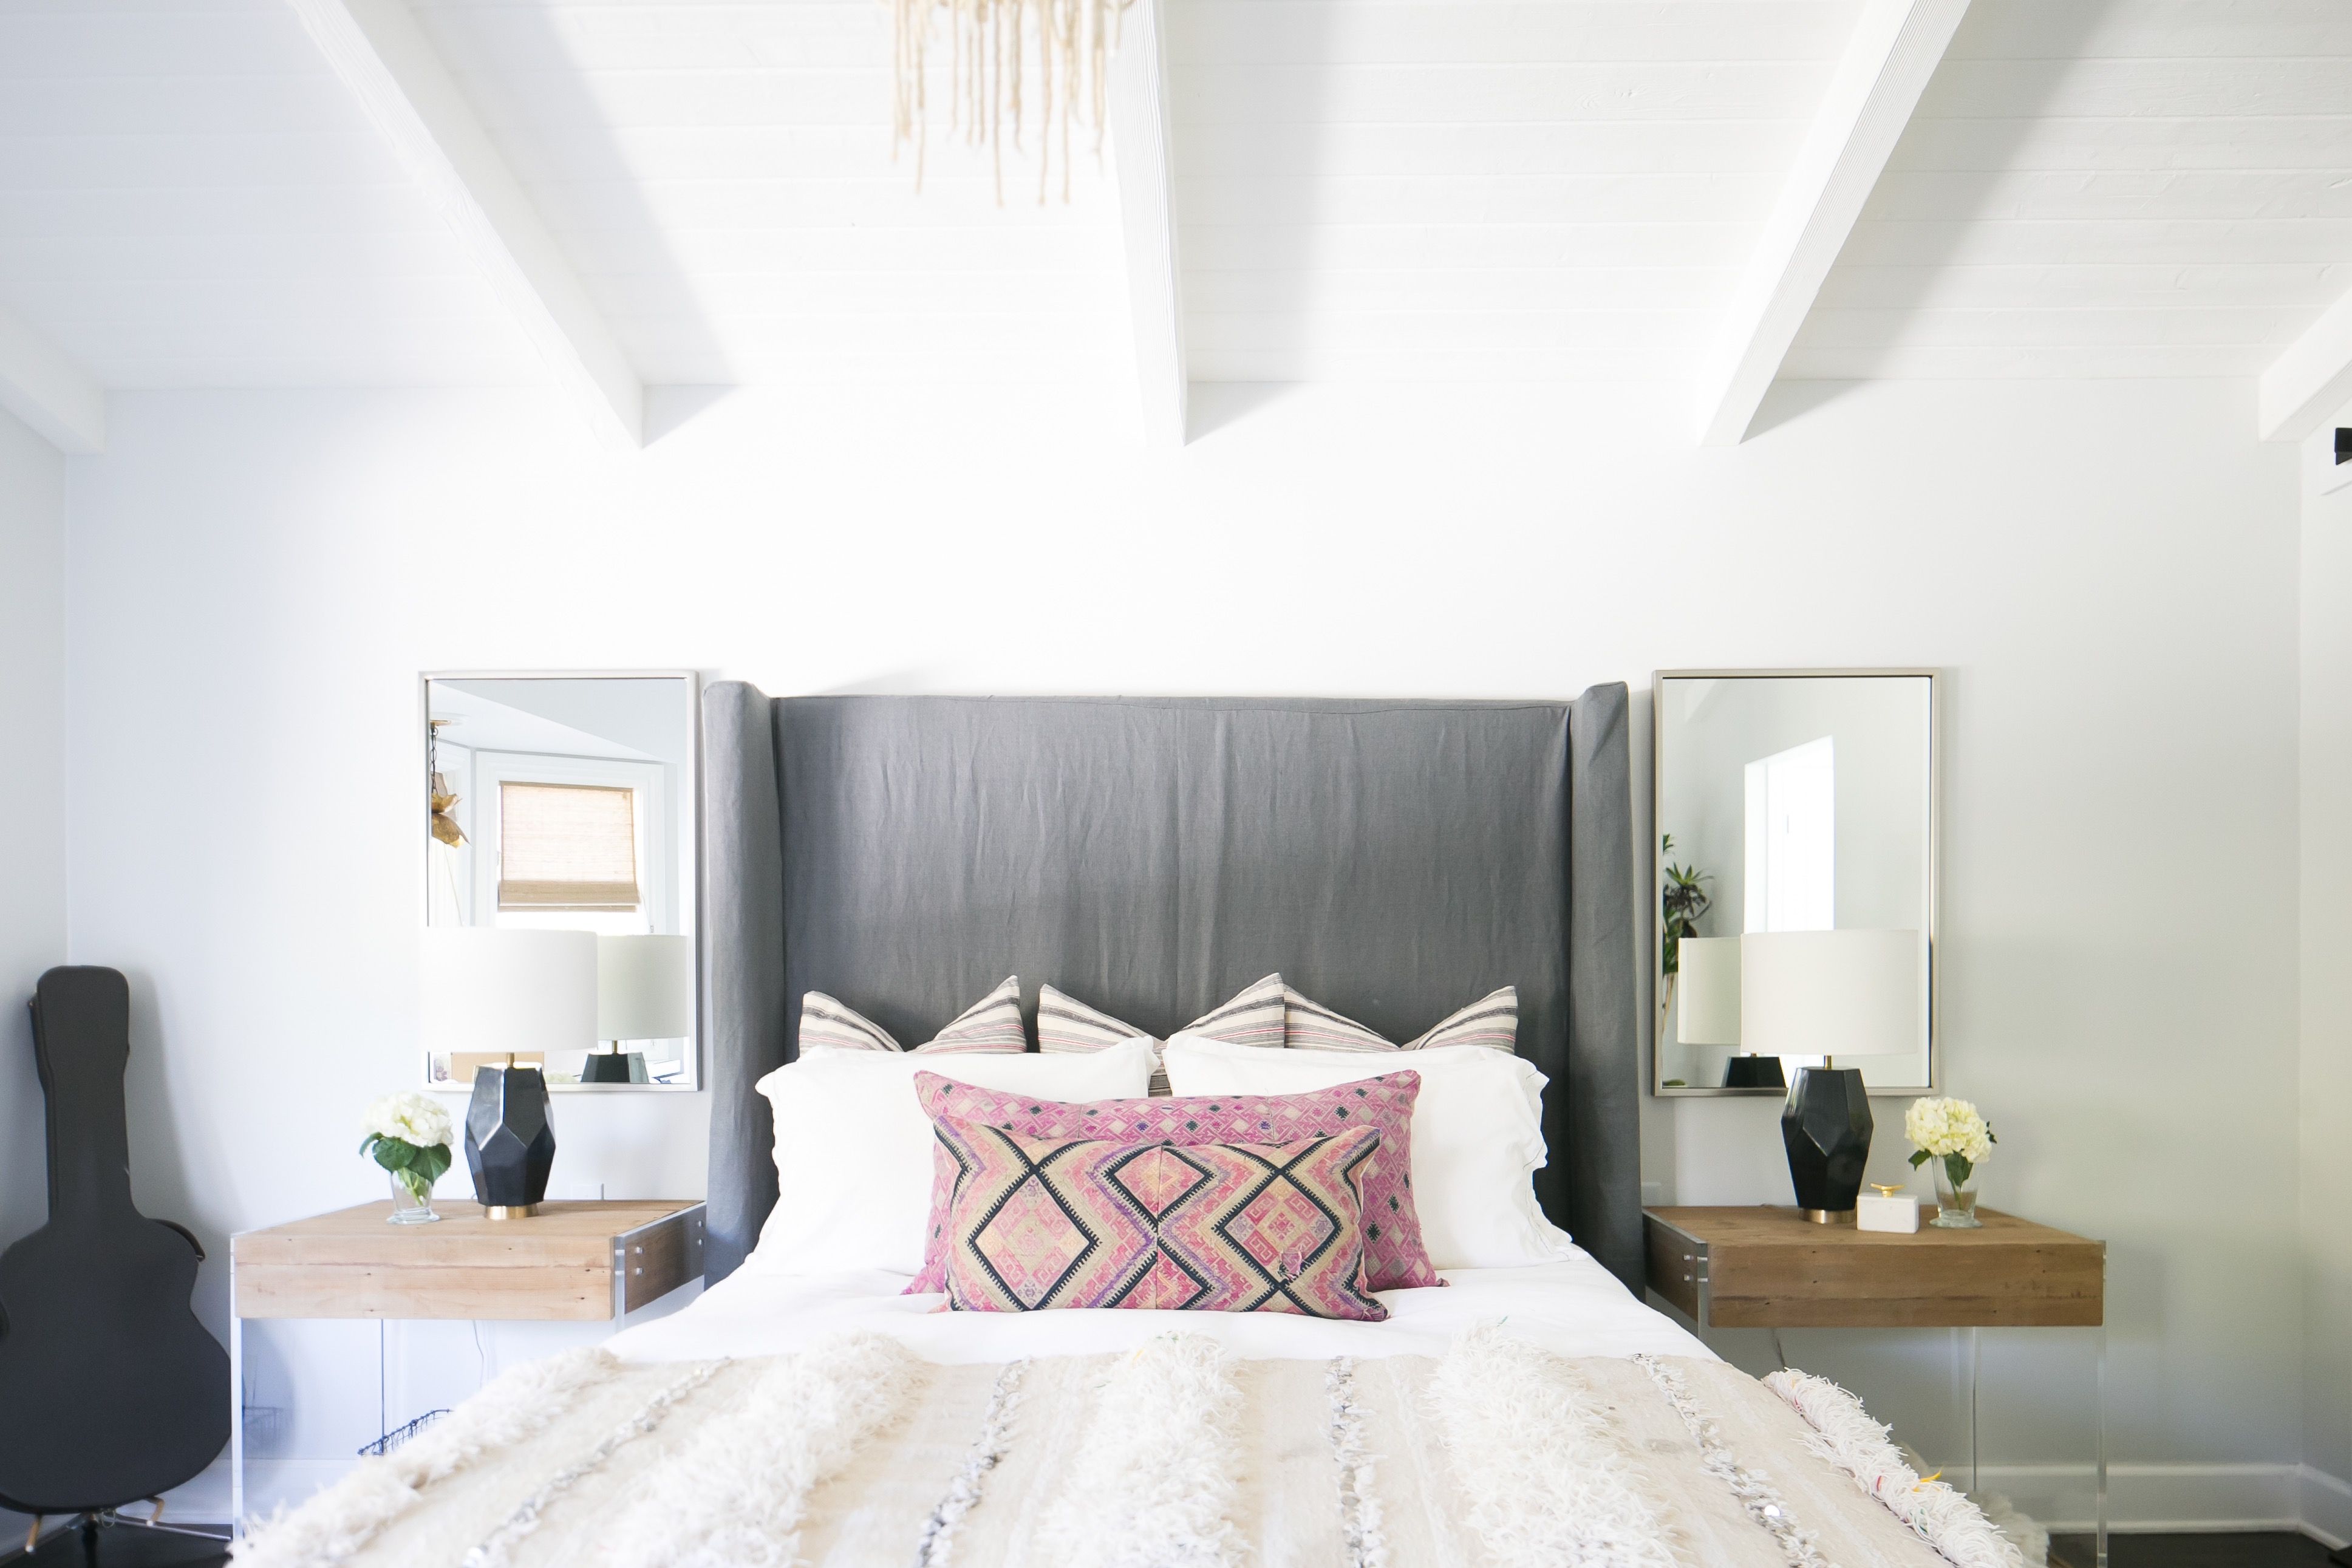 Modern Bedroom With Gray Upholstered Headboard And Black Geometric Table Lamps (View 17 of 23)